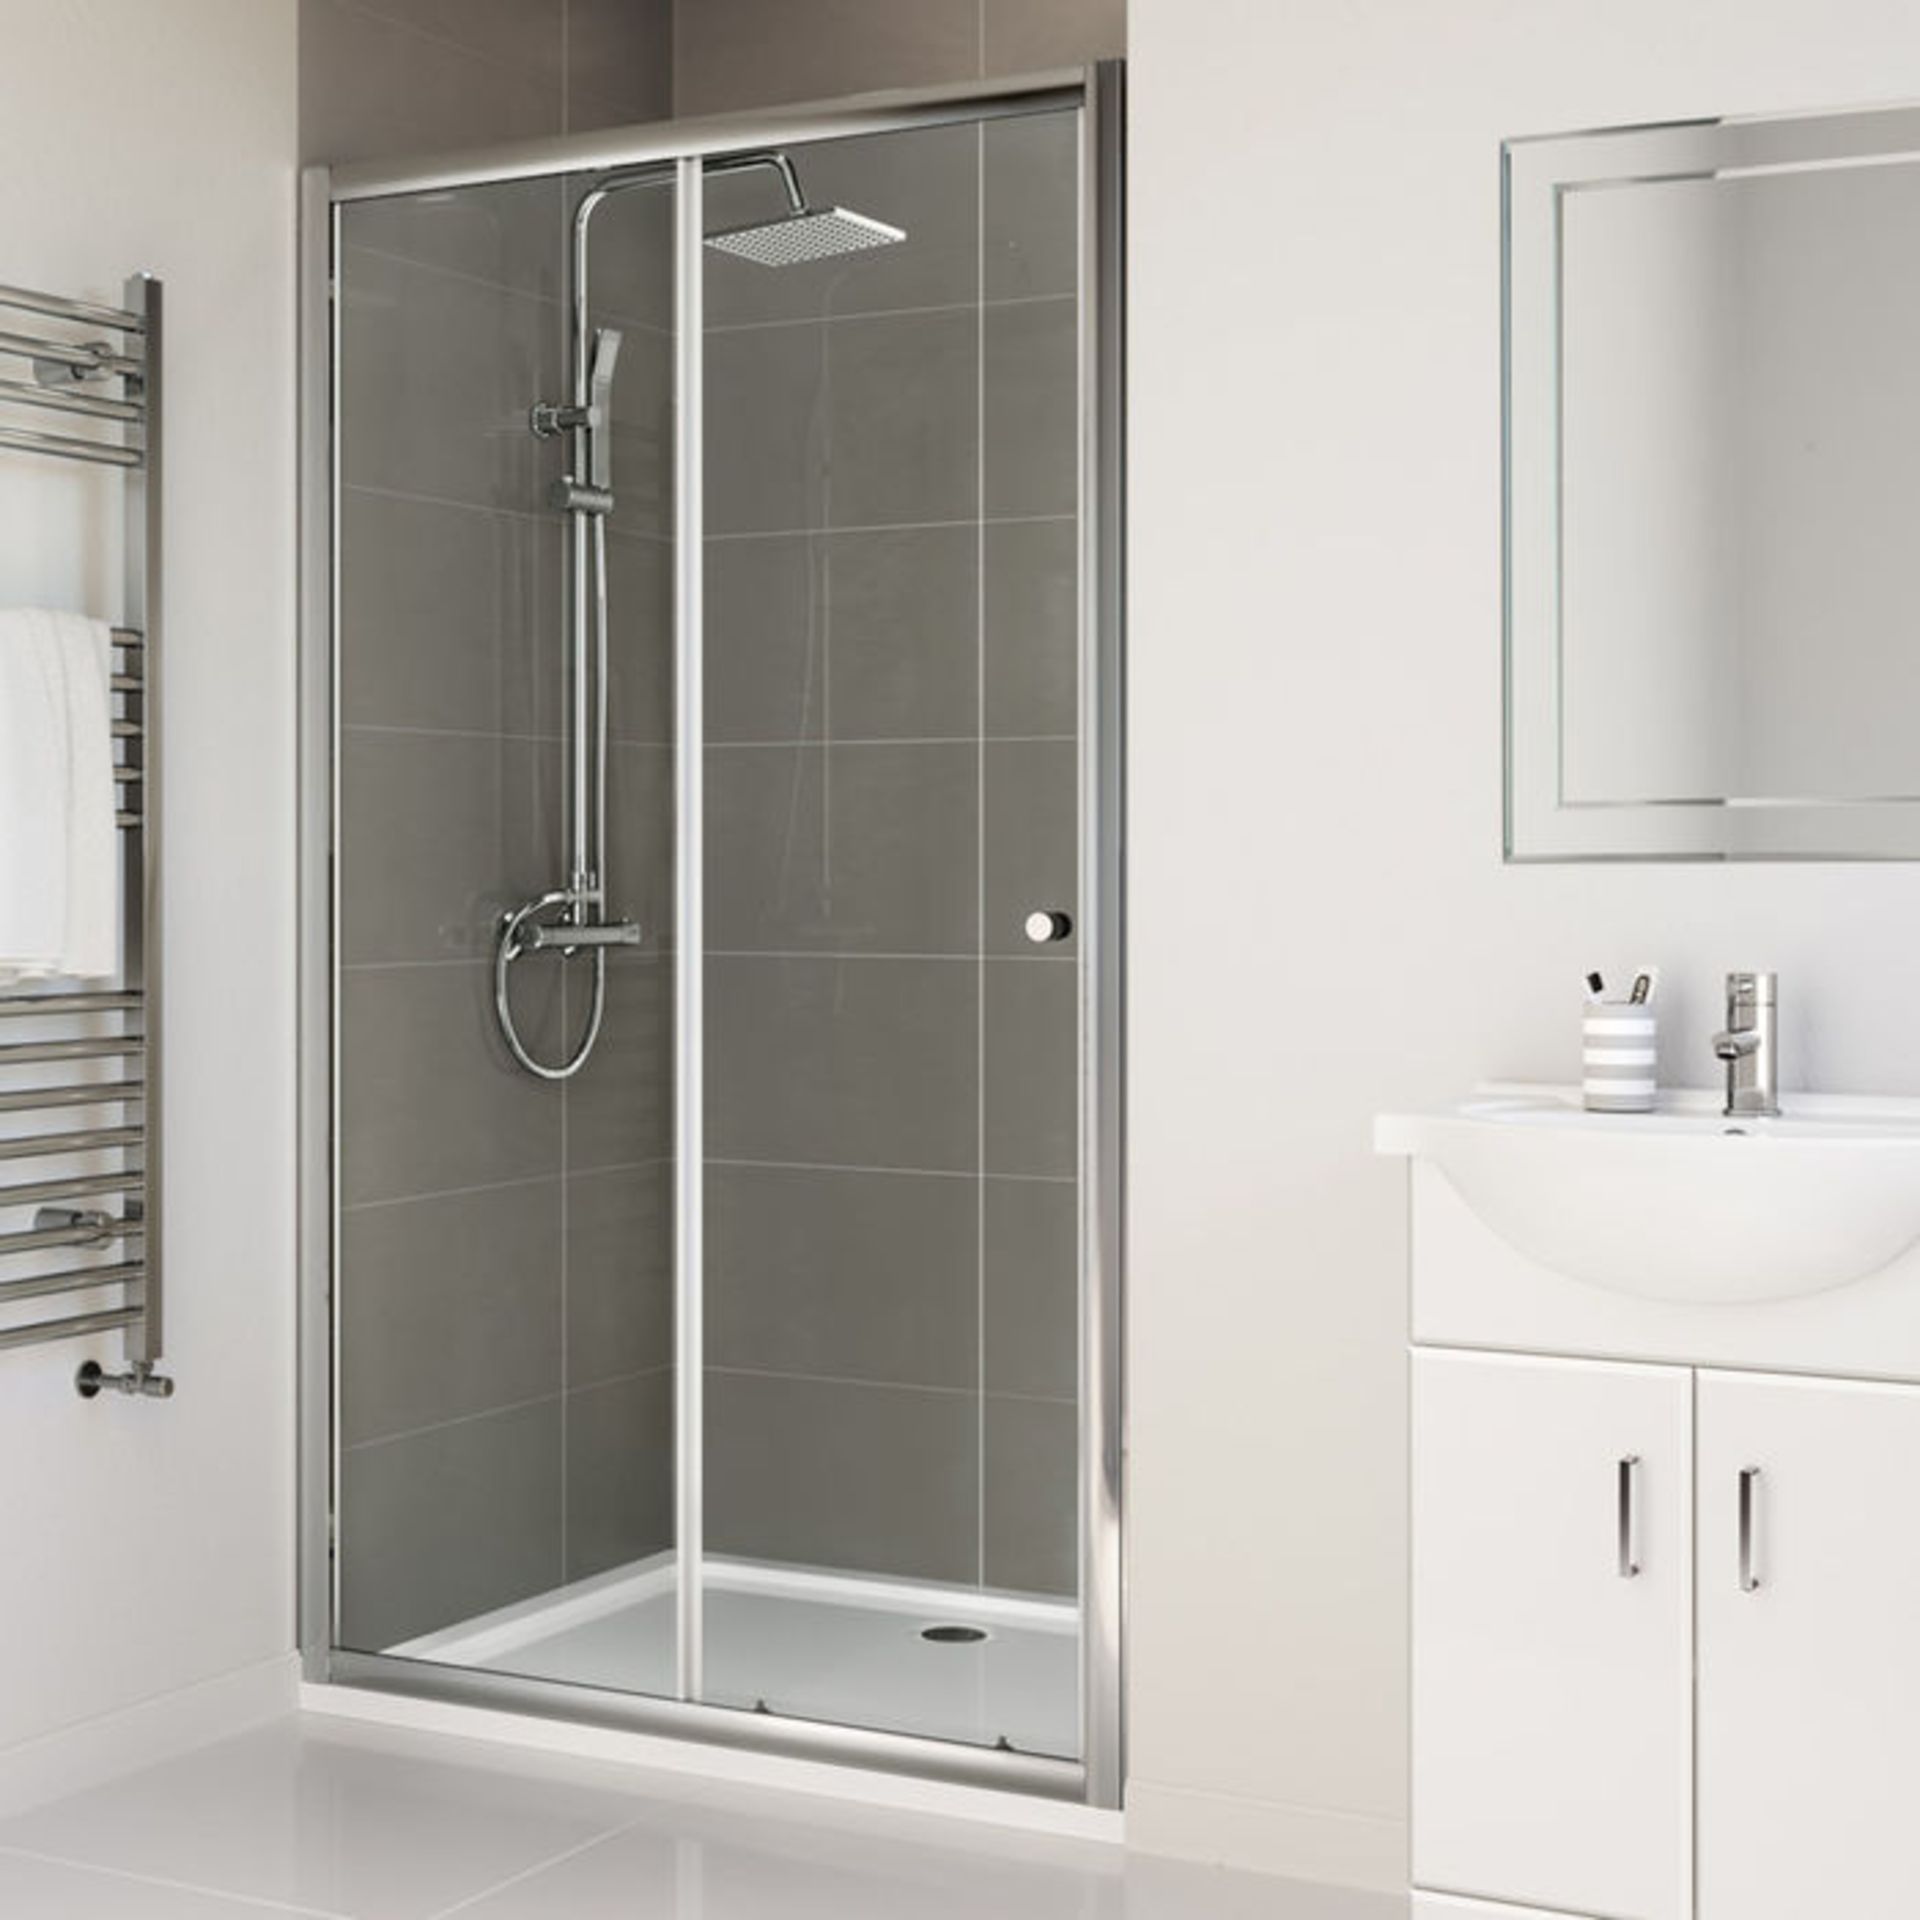 (TS268) 1200mm - Elements Sliding Shower Door. RRP £299.99. 4mm Safety Glass Fully waterproof tested